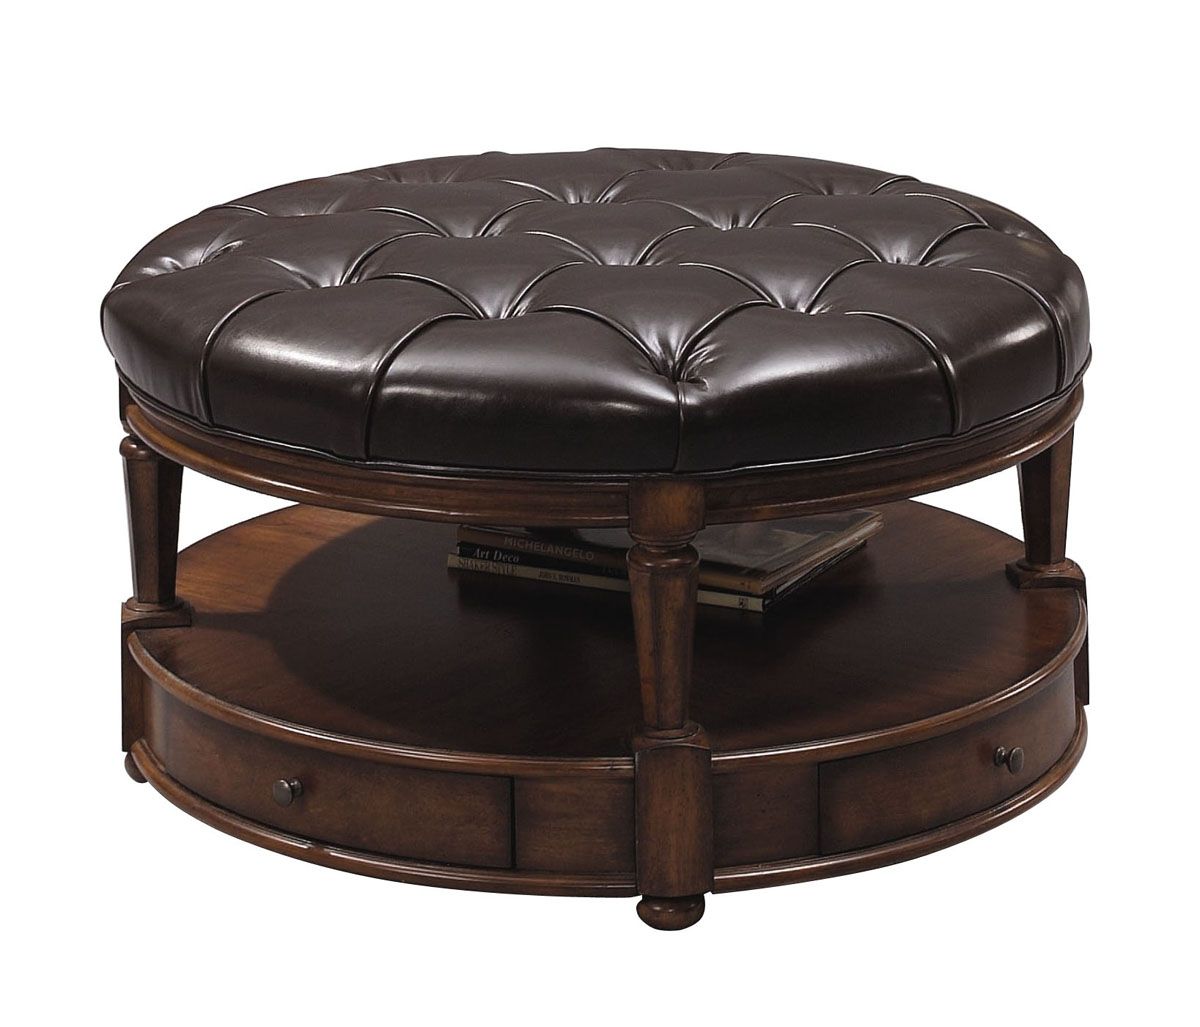 Round Tufted Ottoman Coffee Table With Storage Round Leather Ottomans Coffee Tables Round Ottoman Cocktail Table (View 9 of 10)